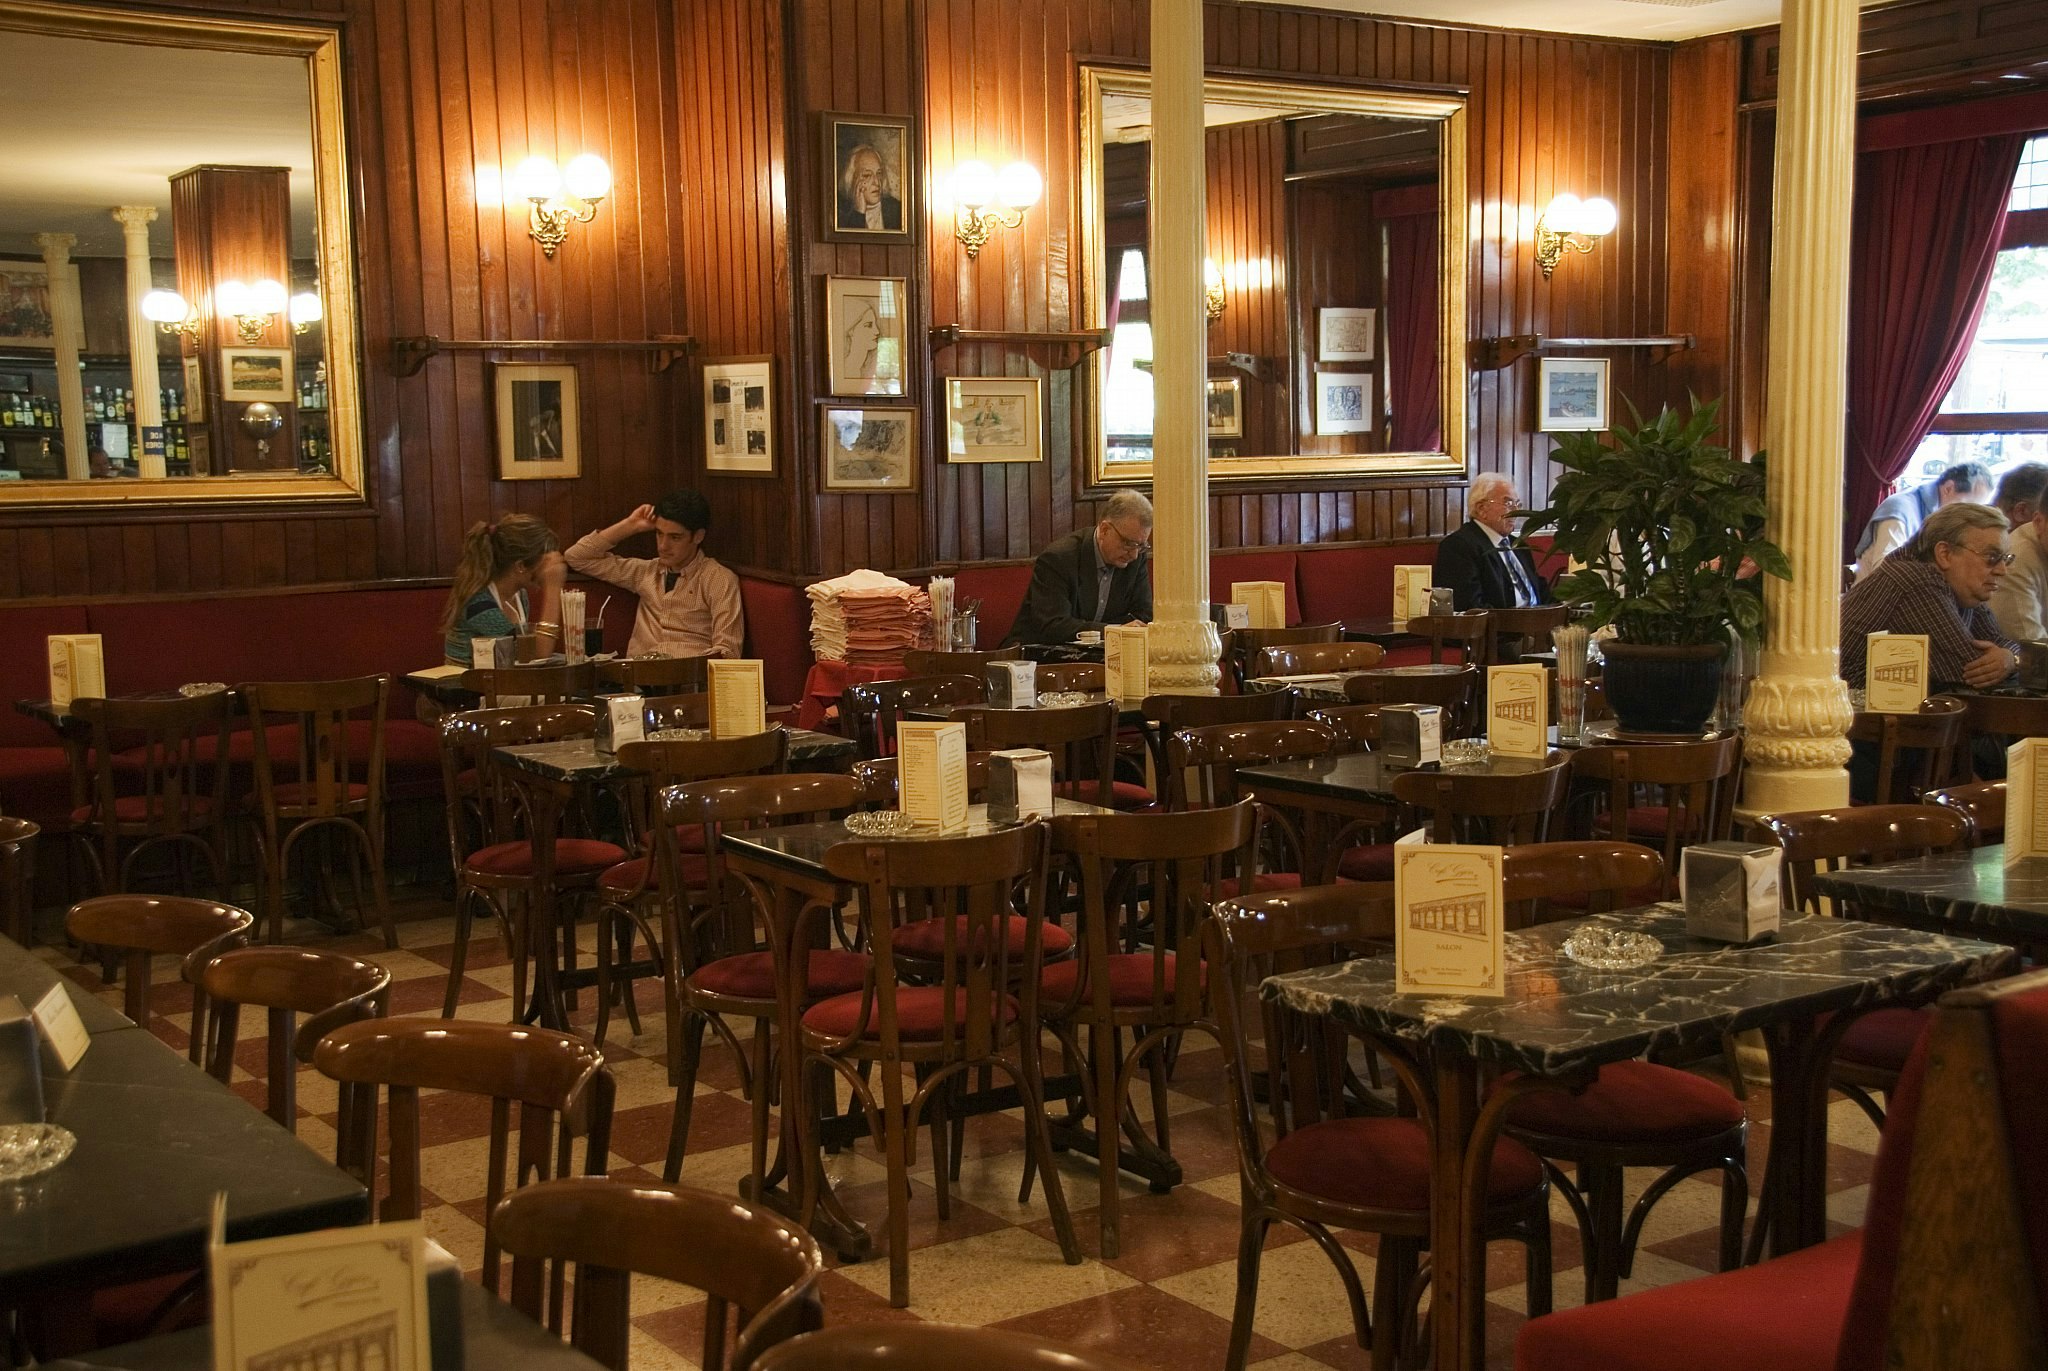 People inside Café Gijón, Madrid, which has a white and red tiled floor, dark wood seats with red cushions, panelled walls and white columns.